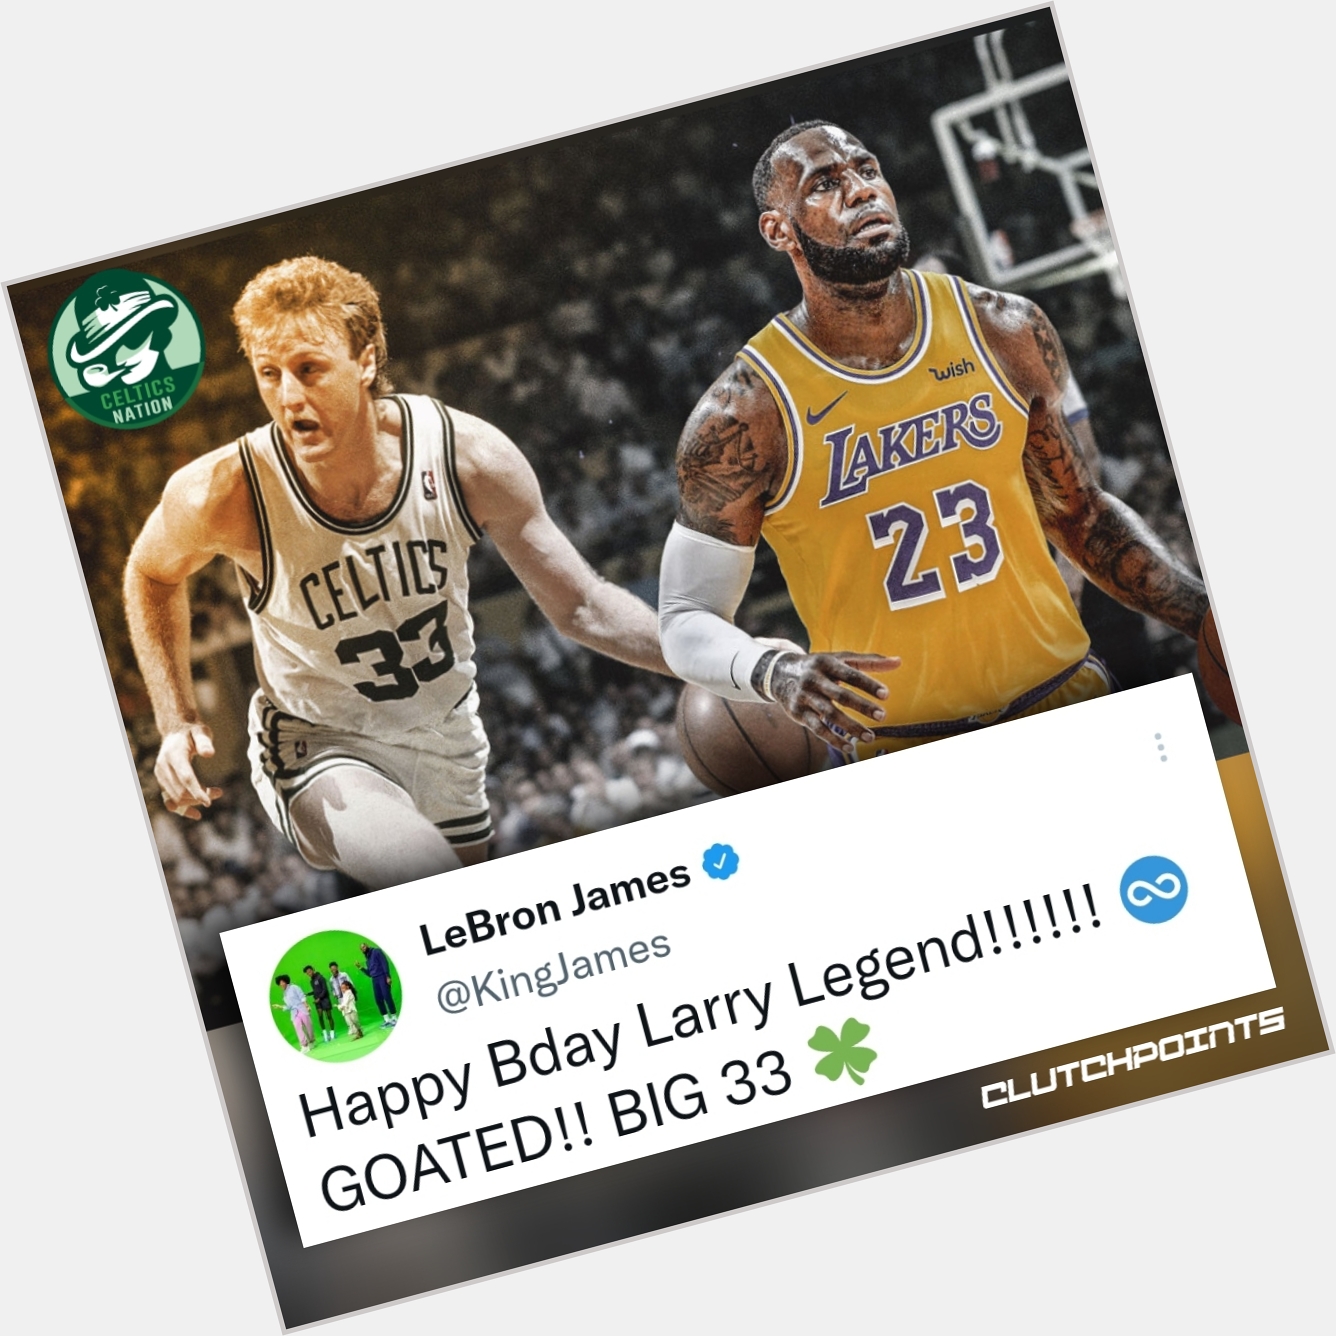 LeBron James wished Larry Bird a happy birthday Two GOATs 